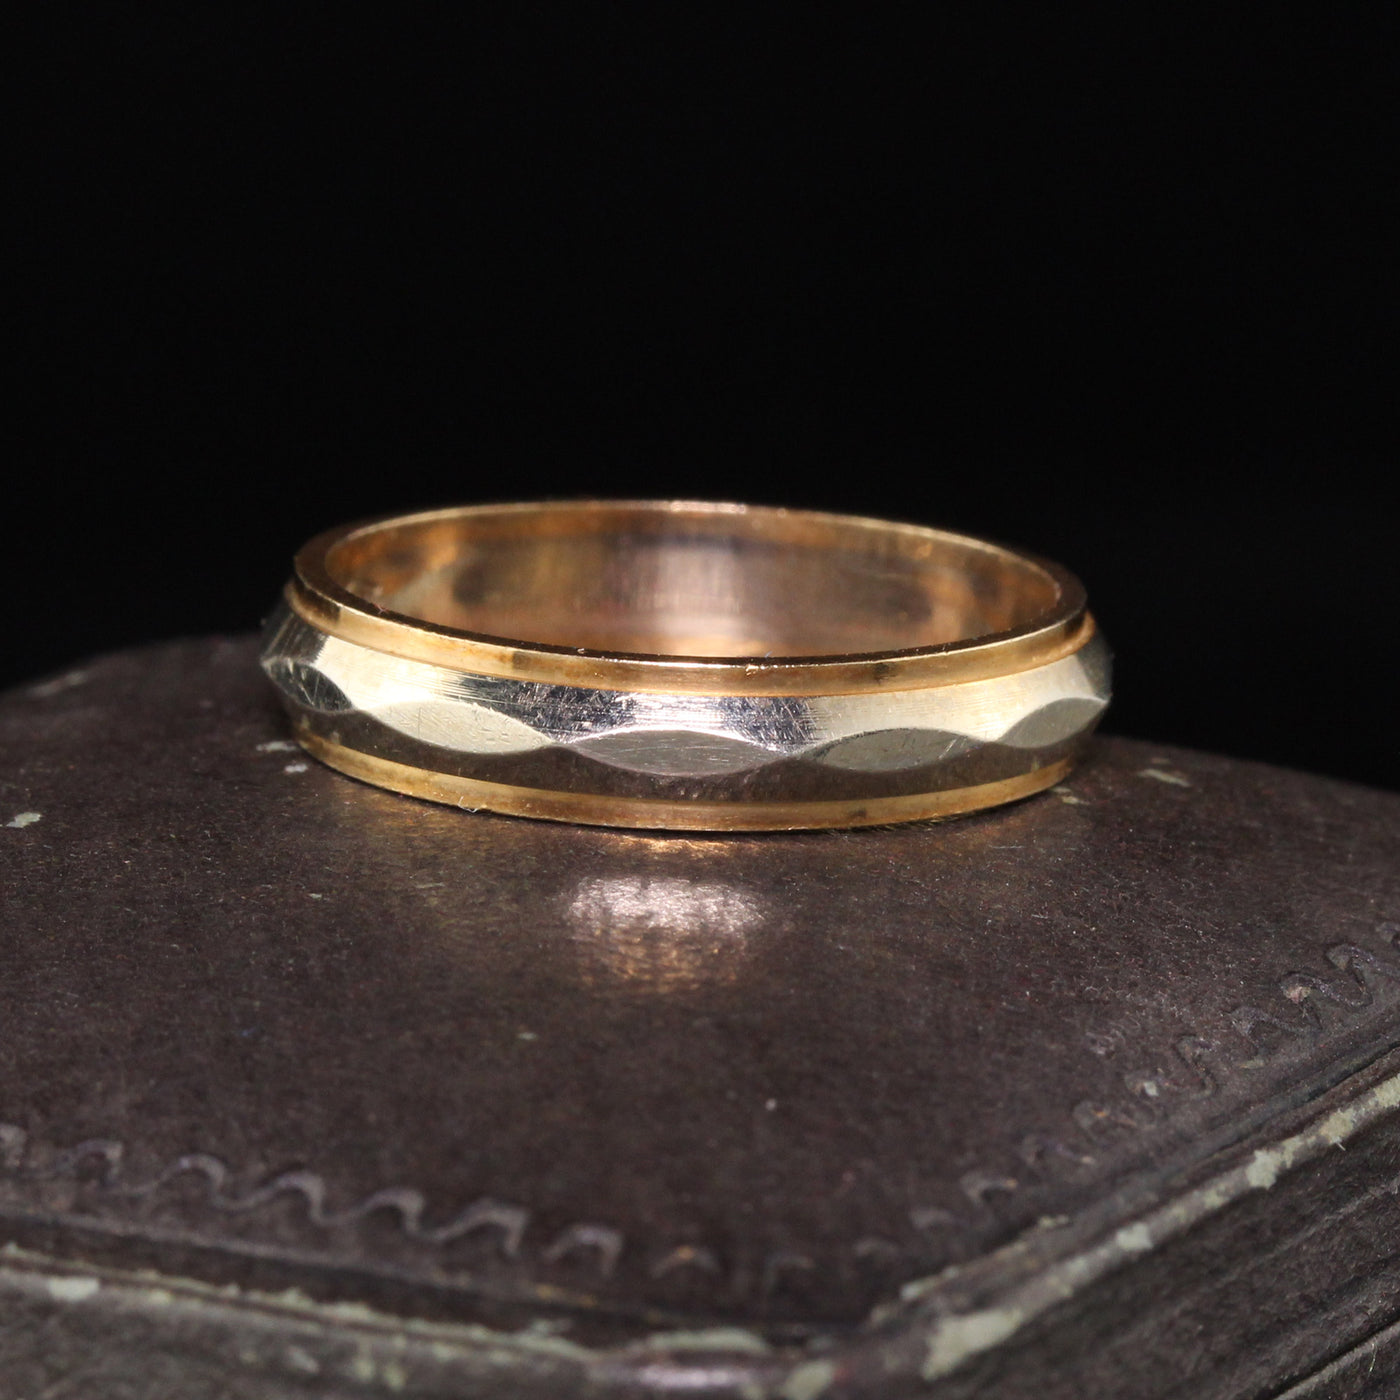 Antique Art Deco 14K Two Tone Yellow Gold Engraved Wedding Band - Size 10 1/2